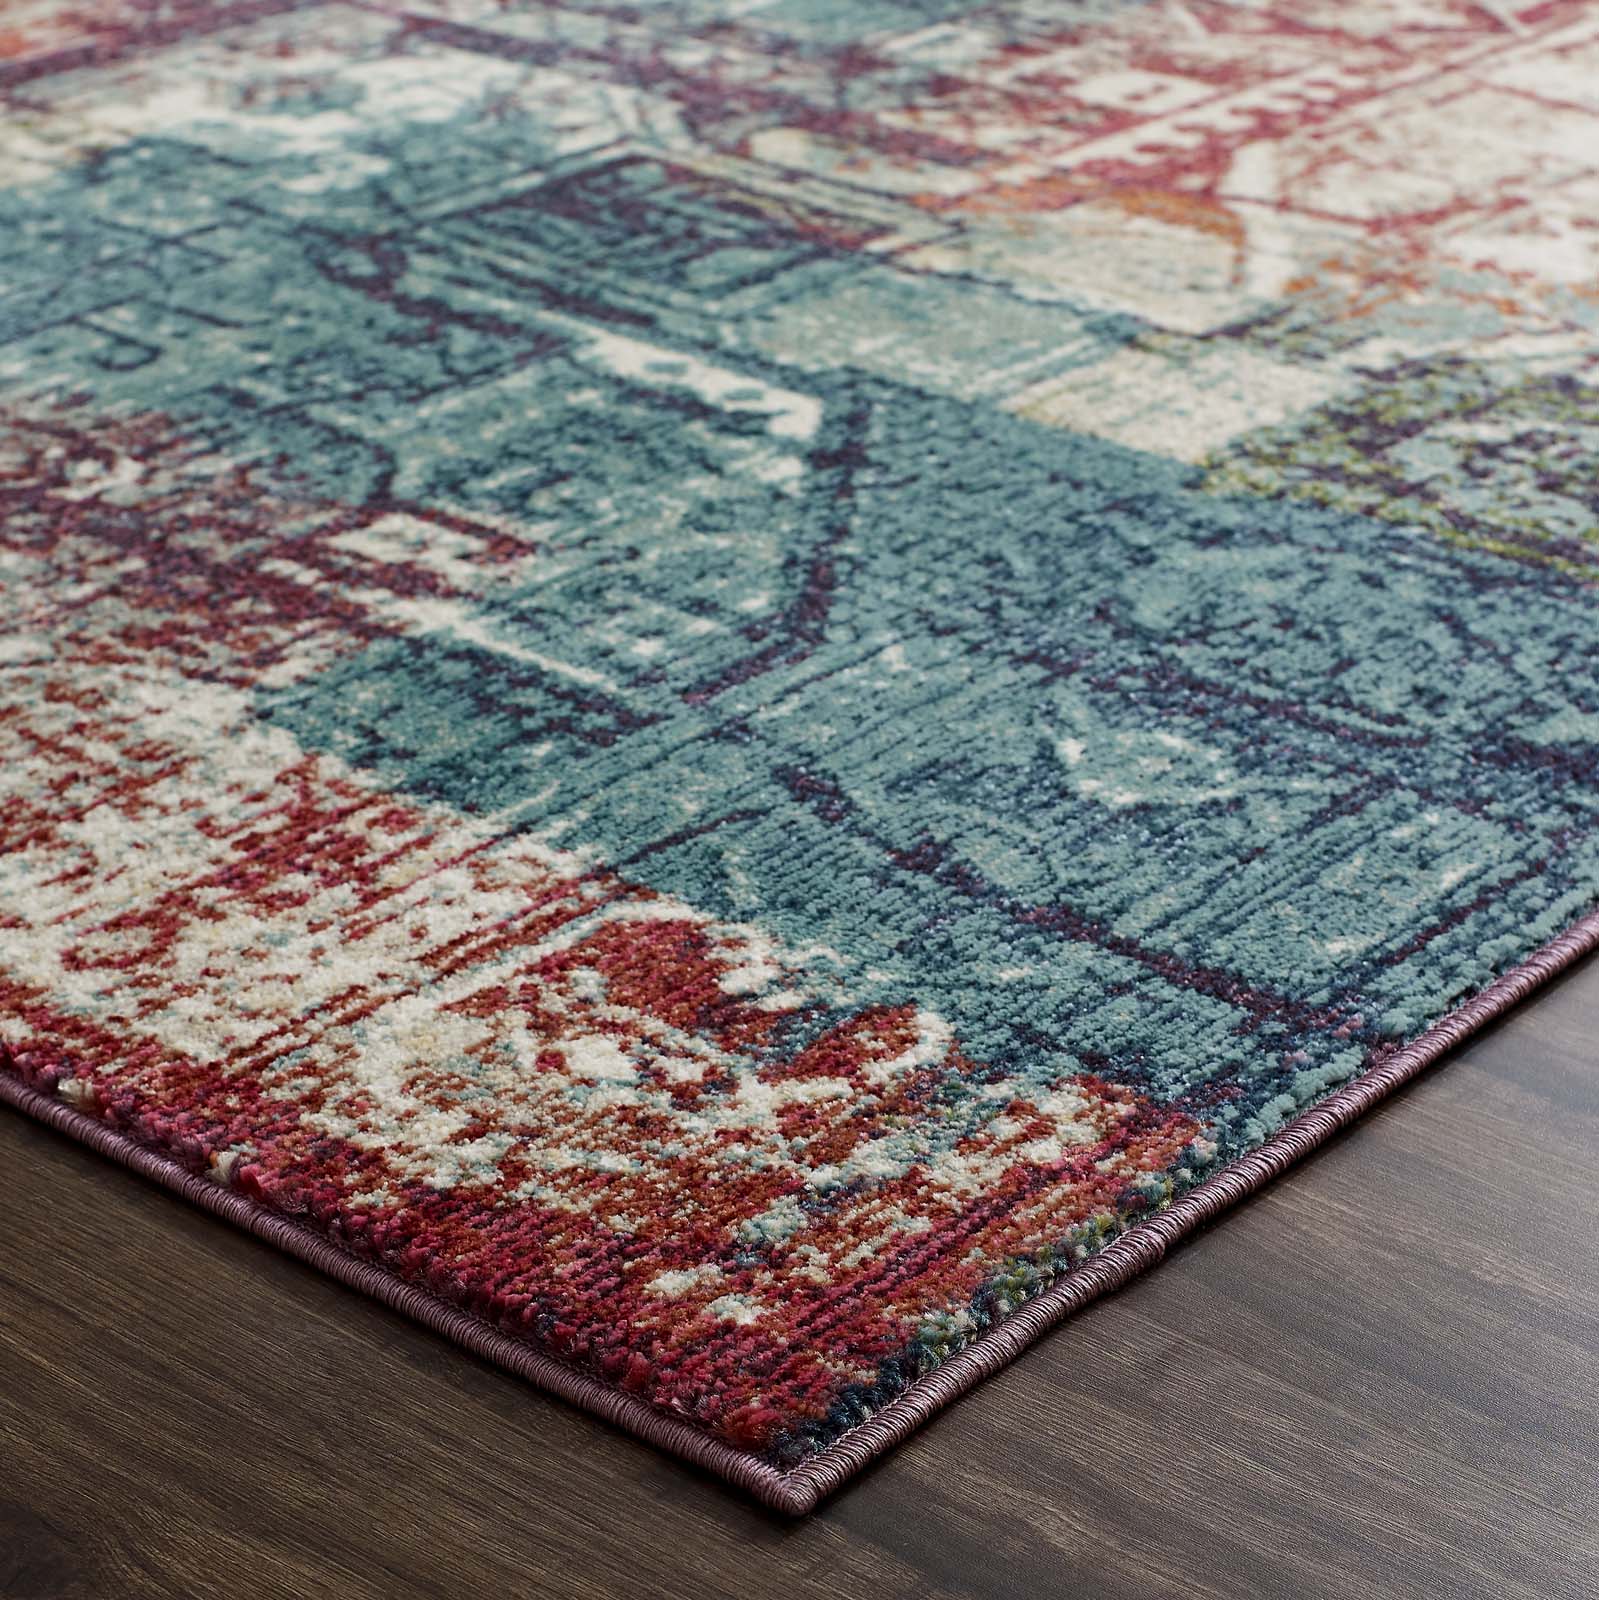 Modway Indoor Rugs - Tribute Elowen Contemporary Modern Vintage Mosaic 5x8 Area Rug Multicolored